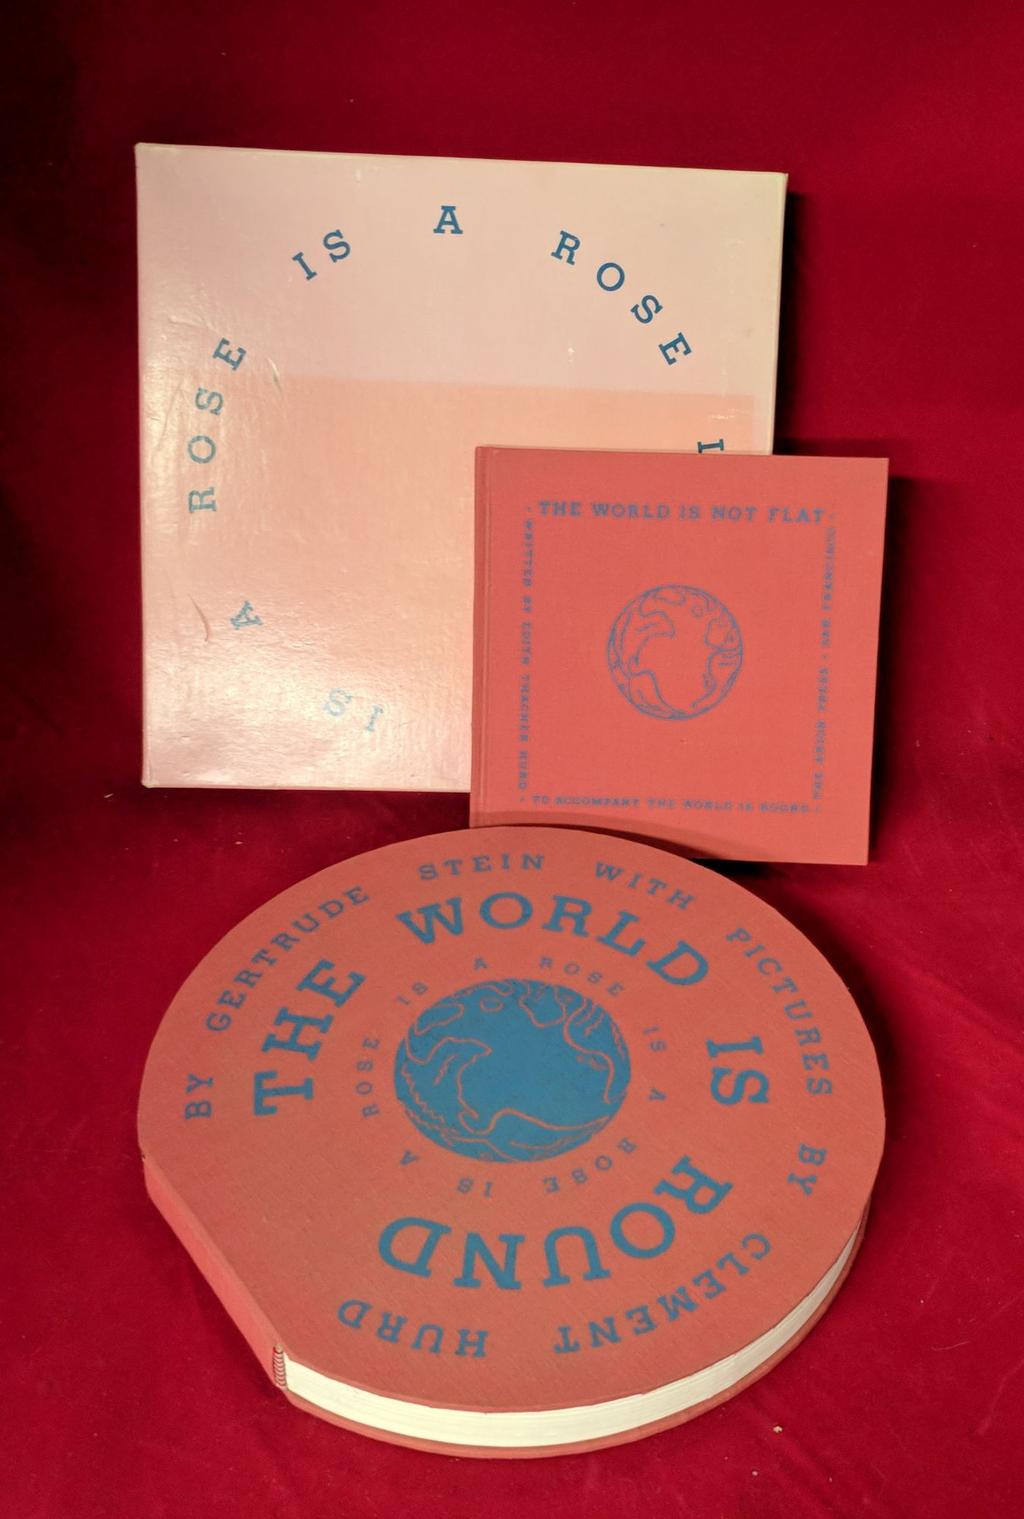 (8) Stein, Gertrude; Edith Thatcher Hurd THE WORLD IS ROUND/ THE WORLD IS NOT FLAT (TWO-VOLUME BOXED SET, AS ISSUED) San Francisco: The Arion Press, 1986. Clement Hurd. Limited Edition.